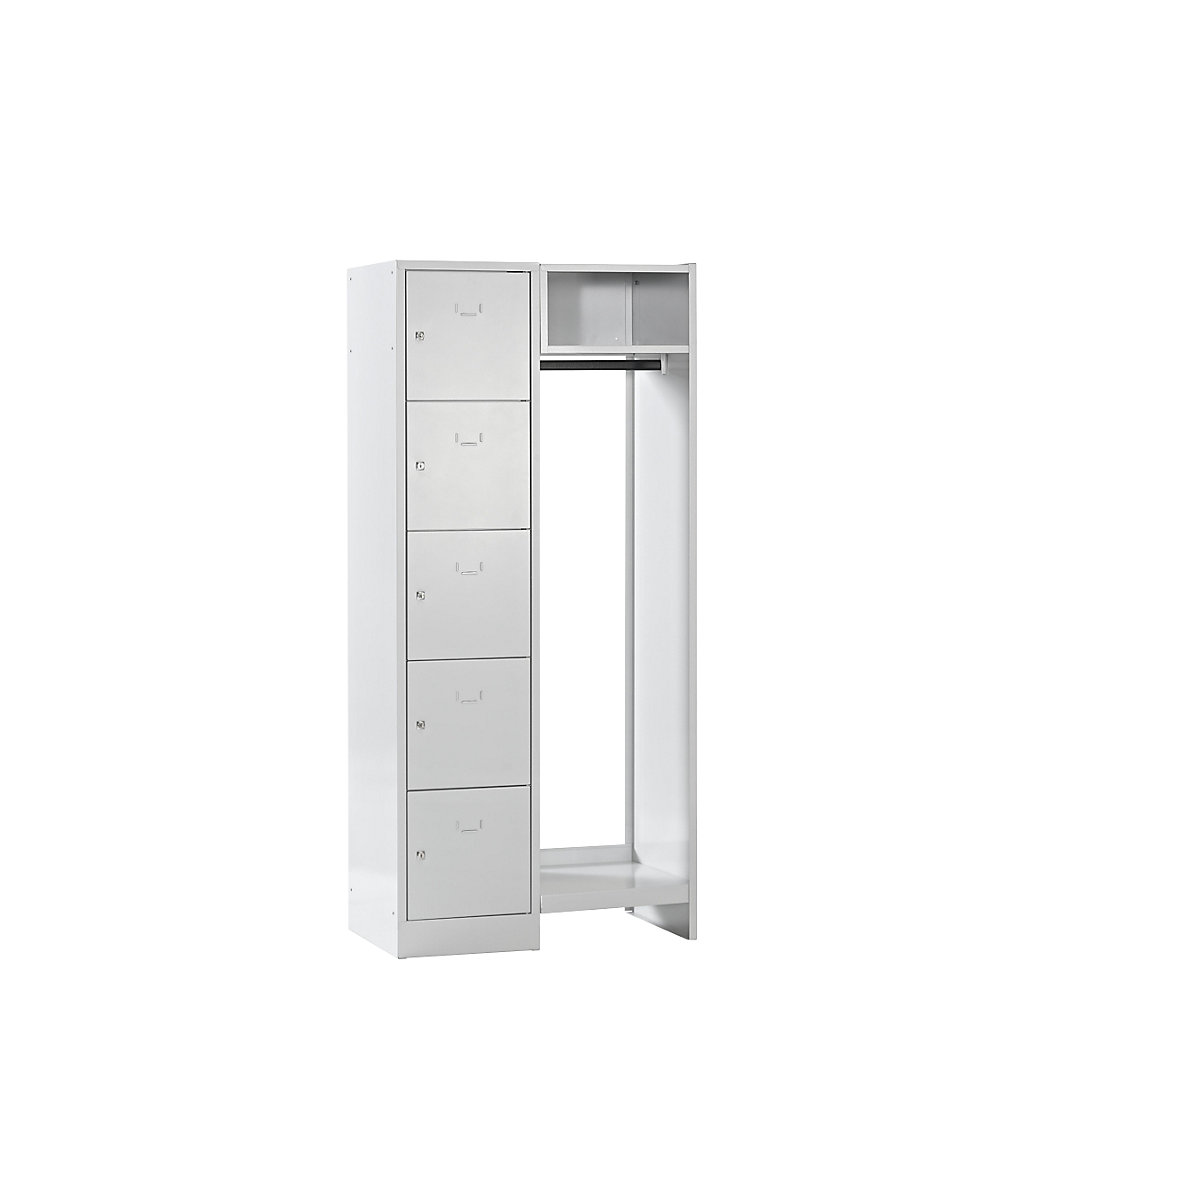 Cloakroom locker system – Wolf, 5 compartments on left, 5 coat hangers, overall width 850 mm, compartment width 398 mm, light grey-14